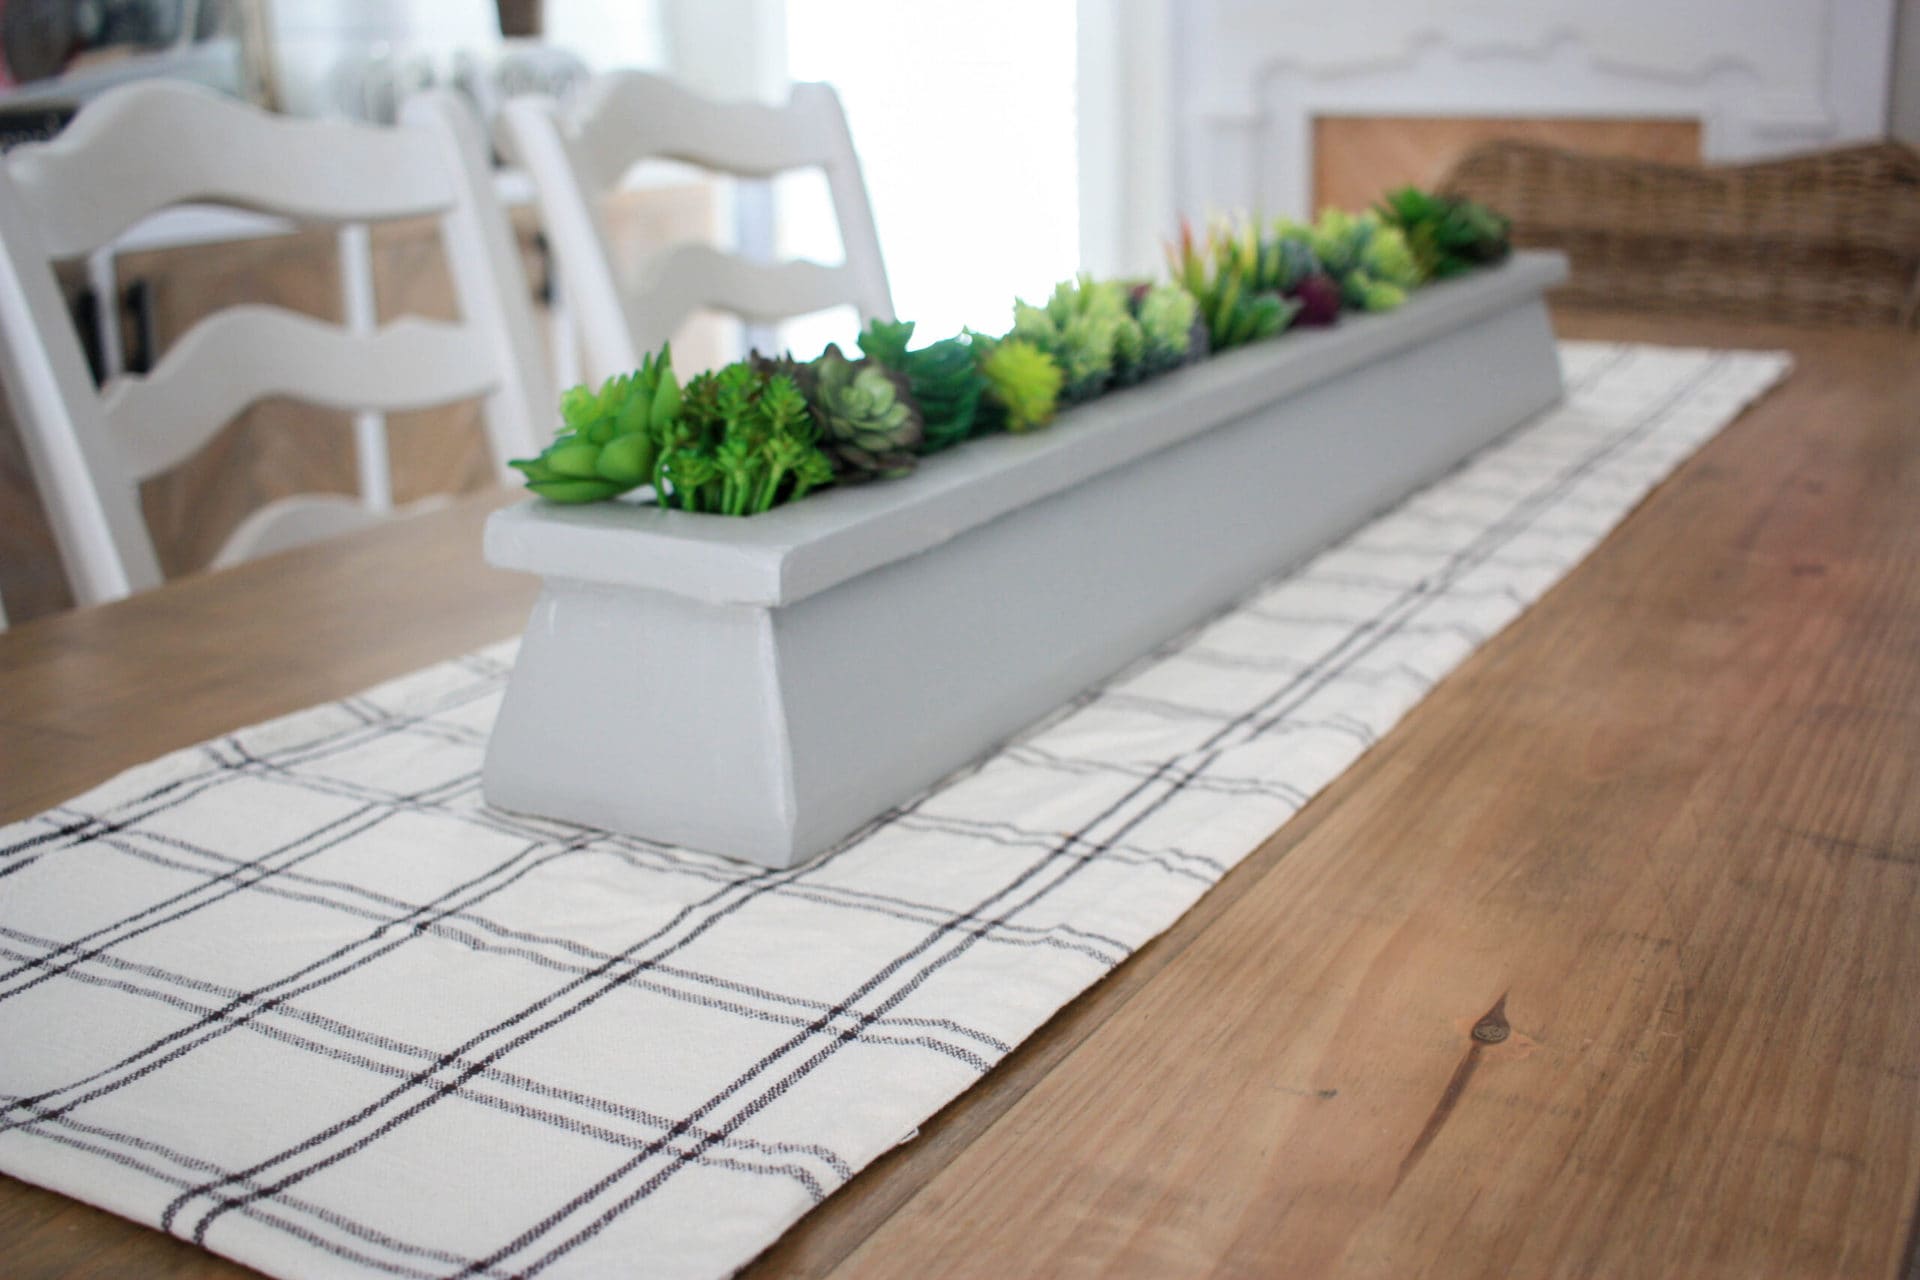 DIY table centerpiece on the table with succulents and a black and white plaid table runner